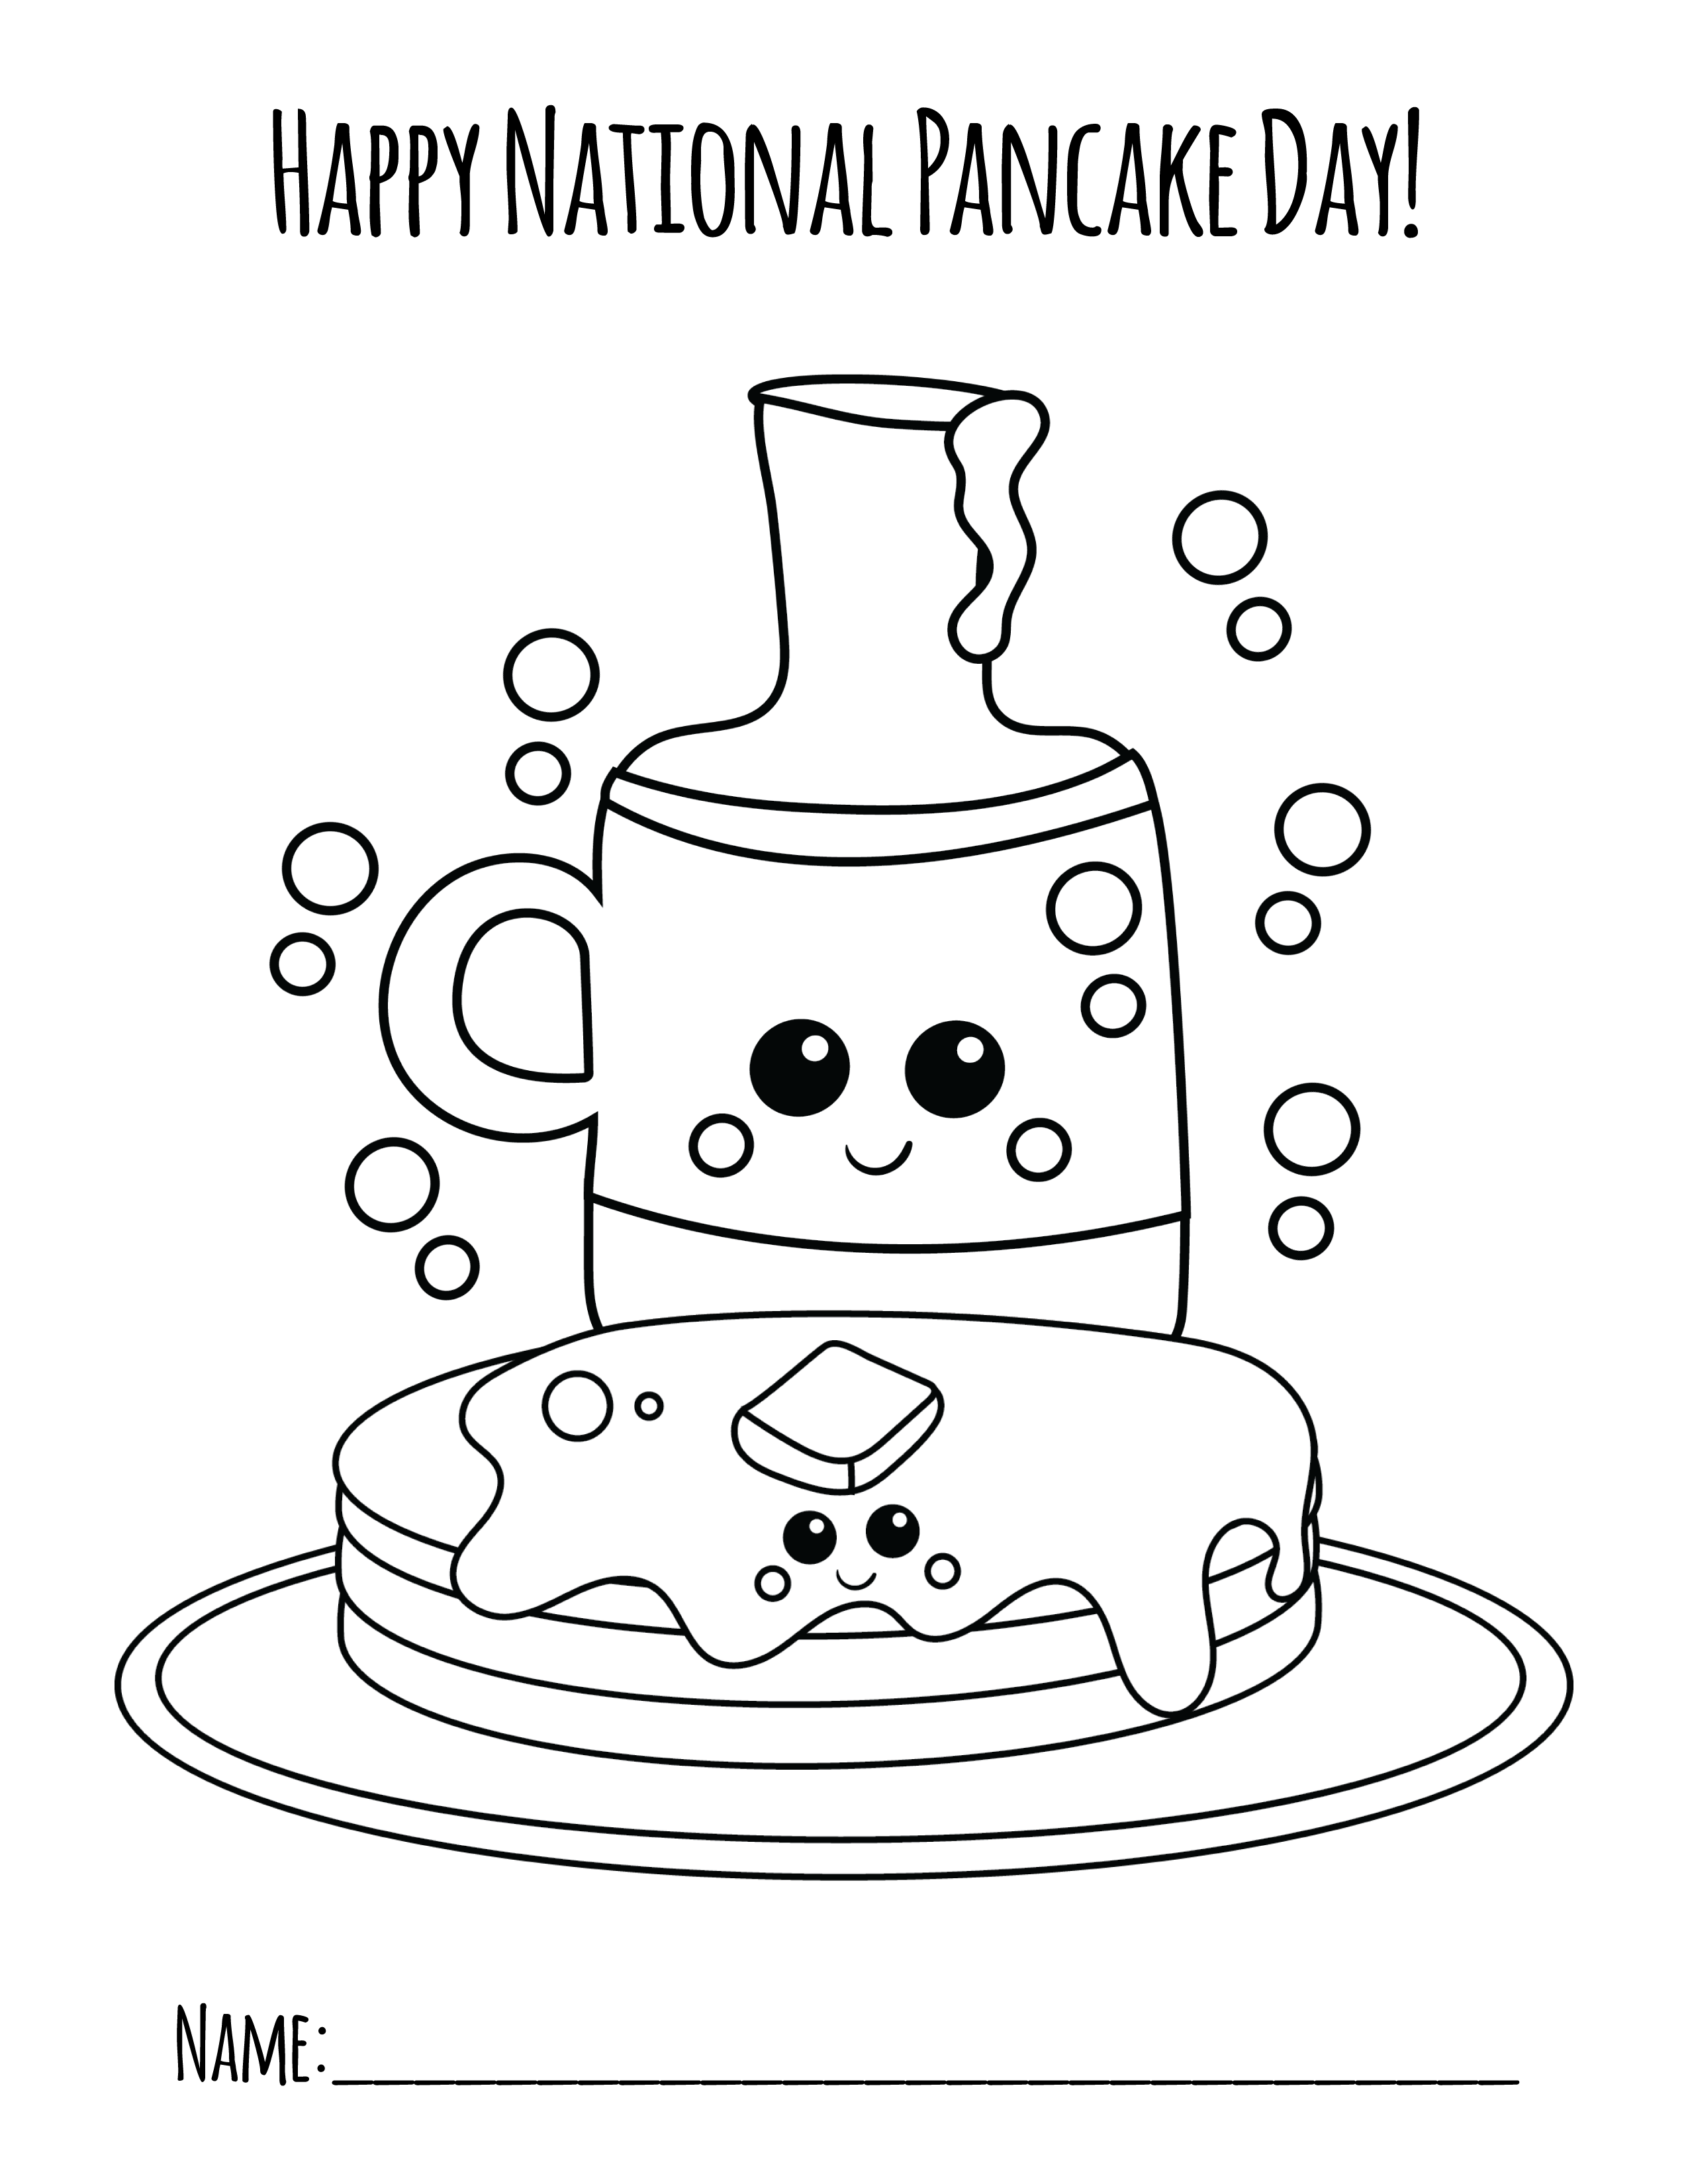 Pancake Day Coloring Pages Coloring Home